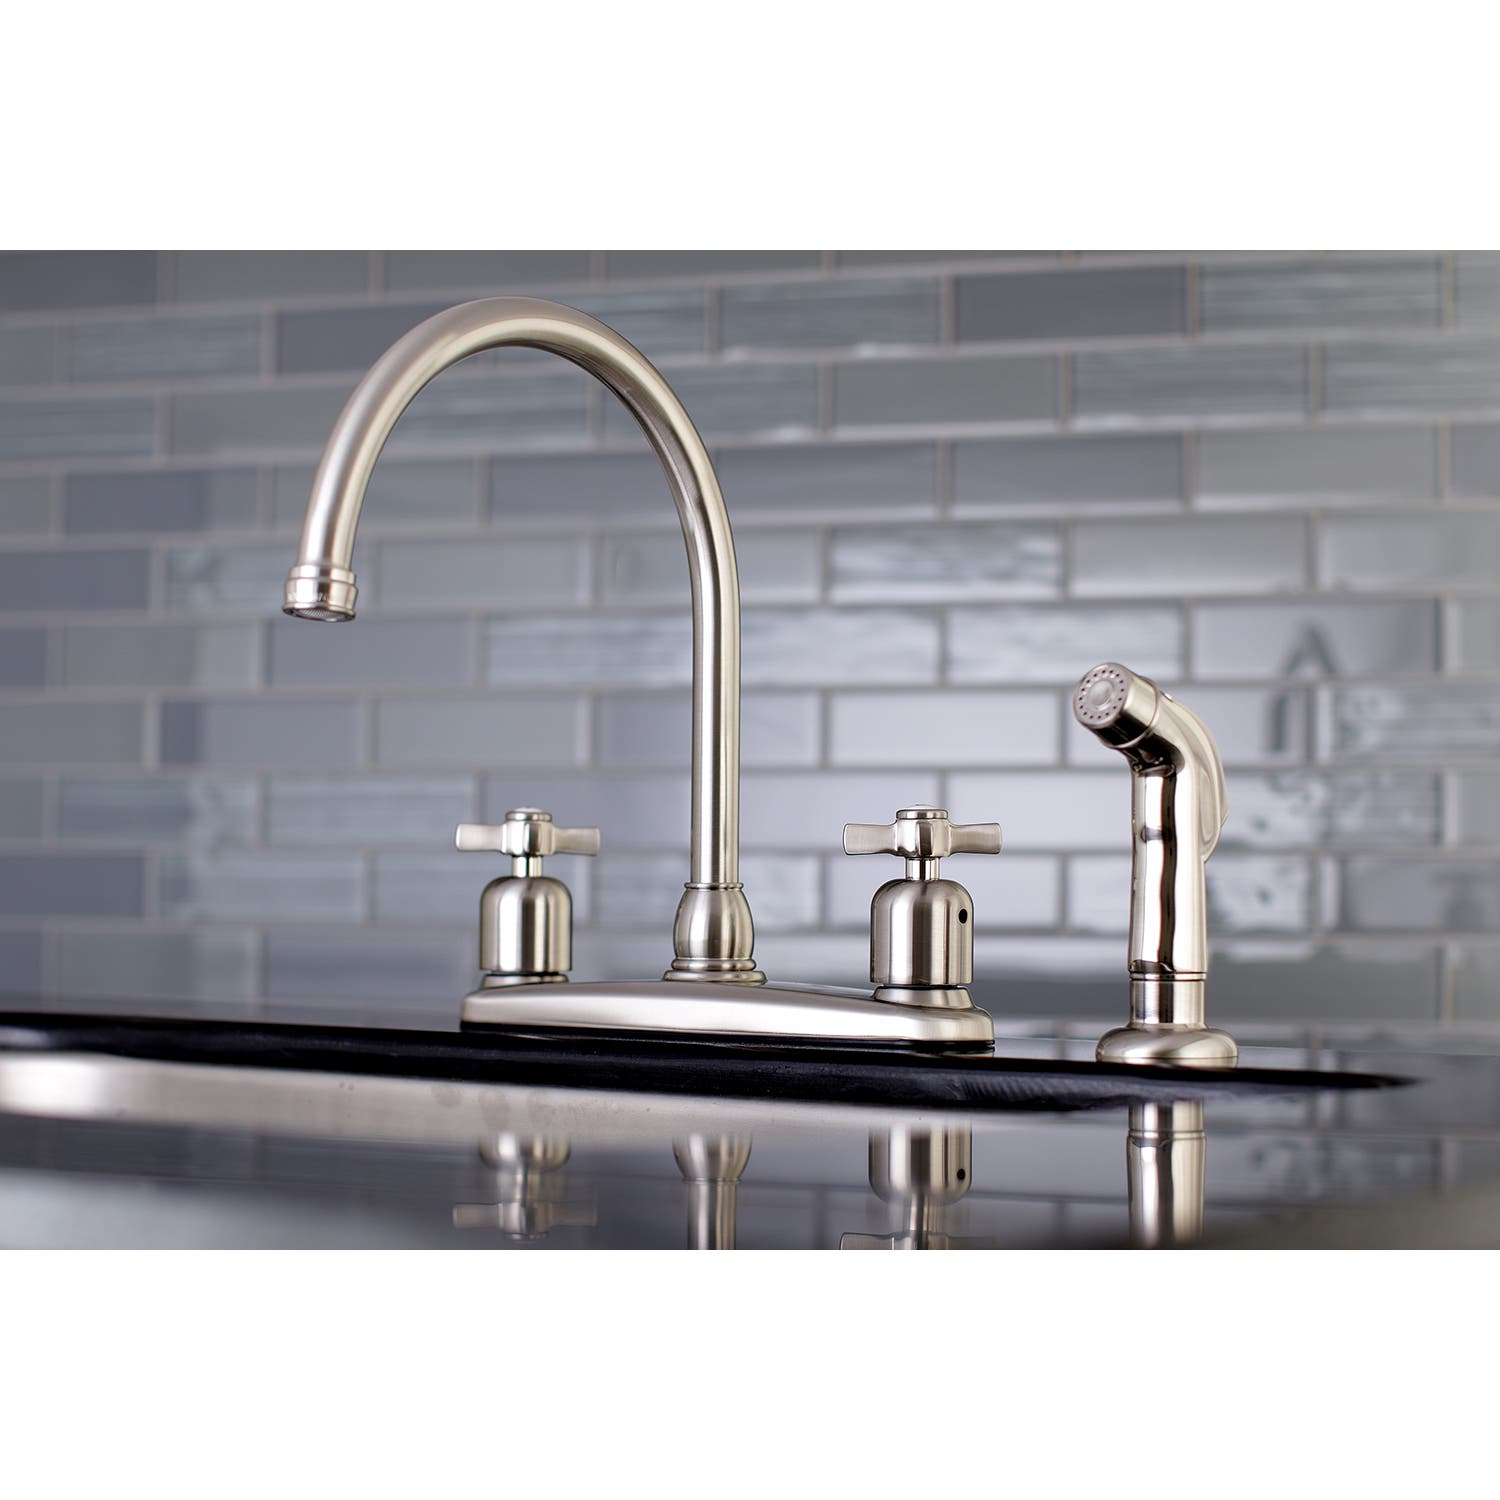 The Brushed Nickel Faucet Reaches for Creativity in Modern Kitchens, FB798ZXSP